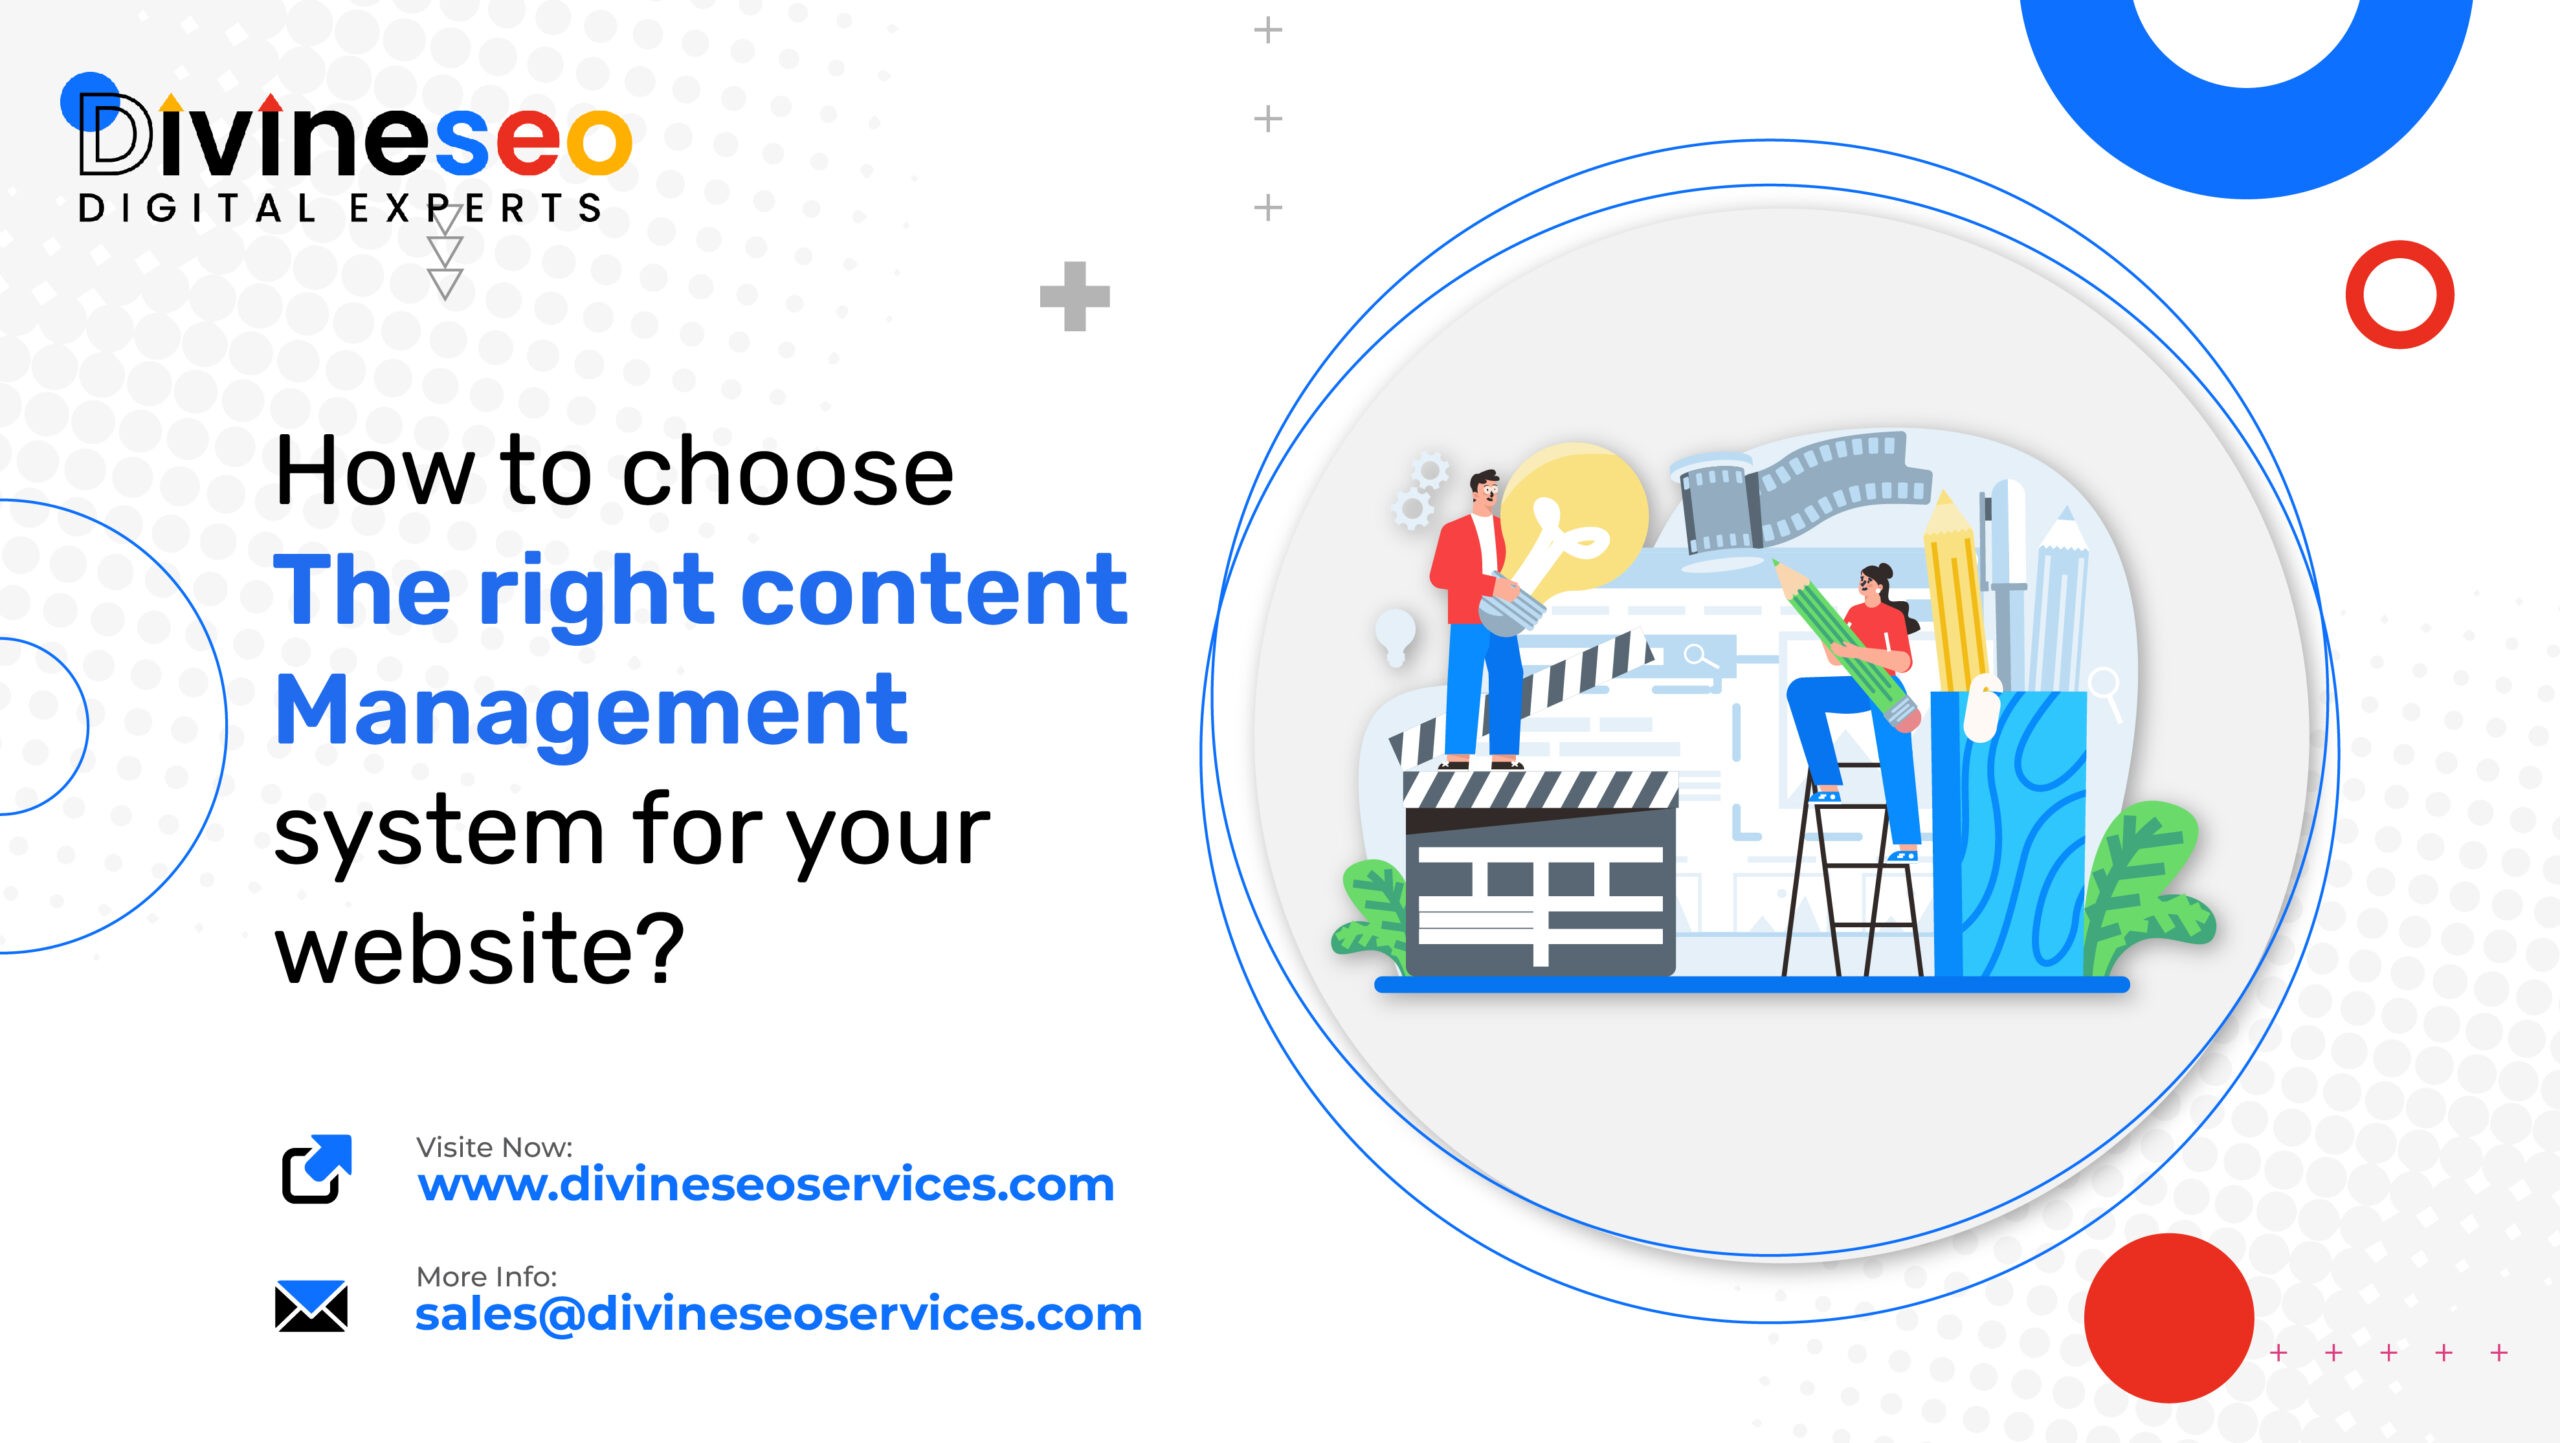 How to Choose the Right Content Management System for your Website?